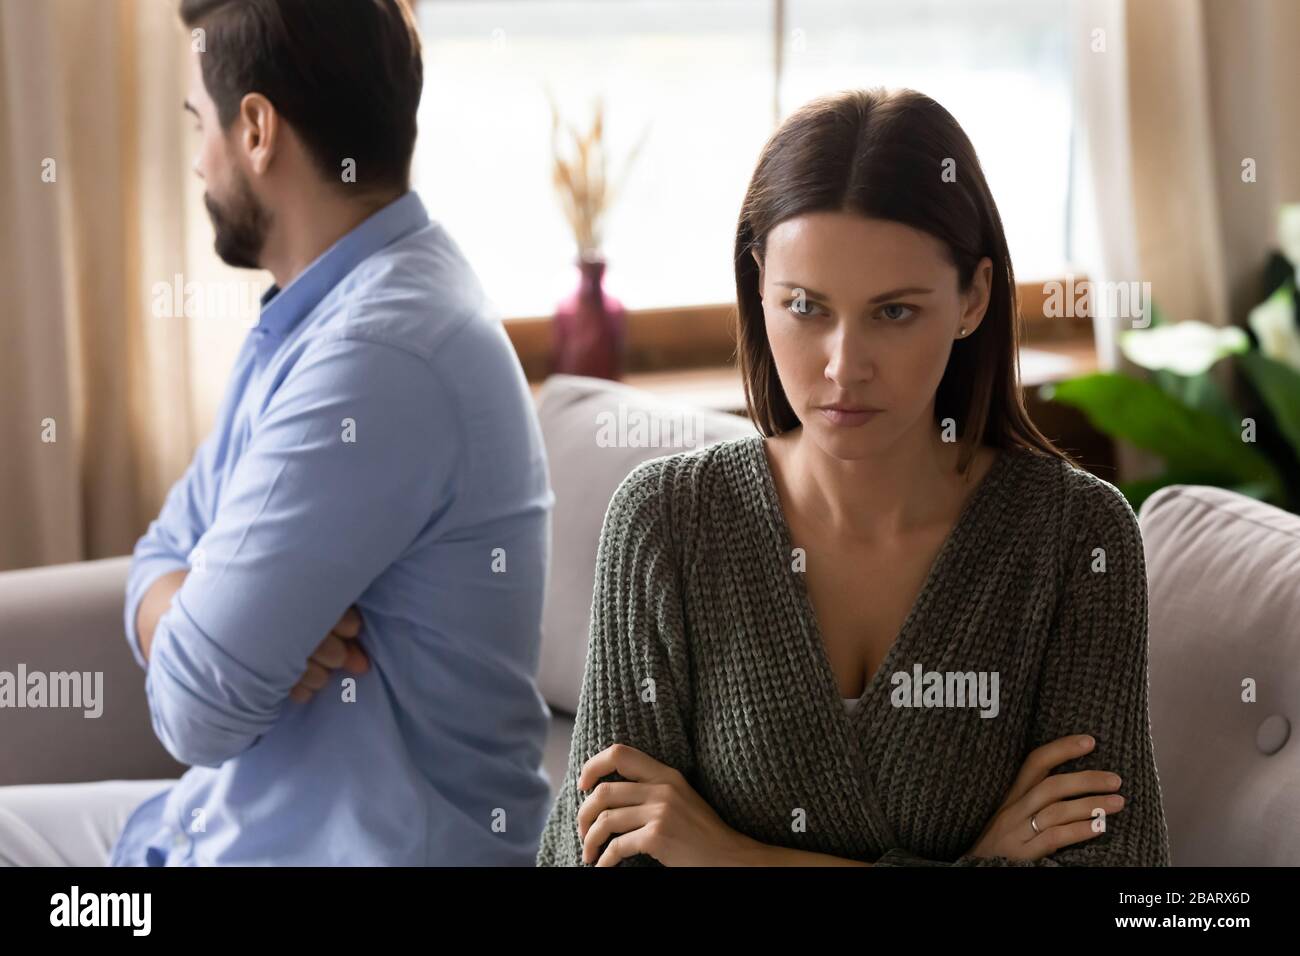 Stressed depressed couple ignoring each other after quarrel. Stock Photo